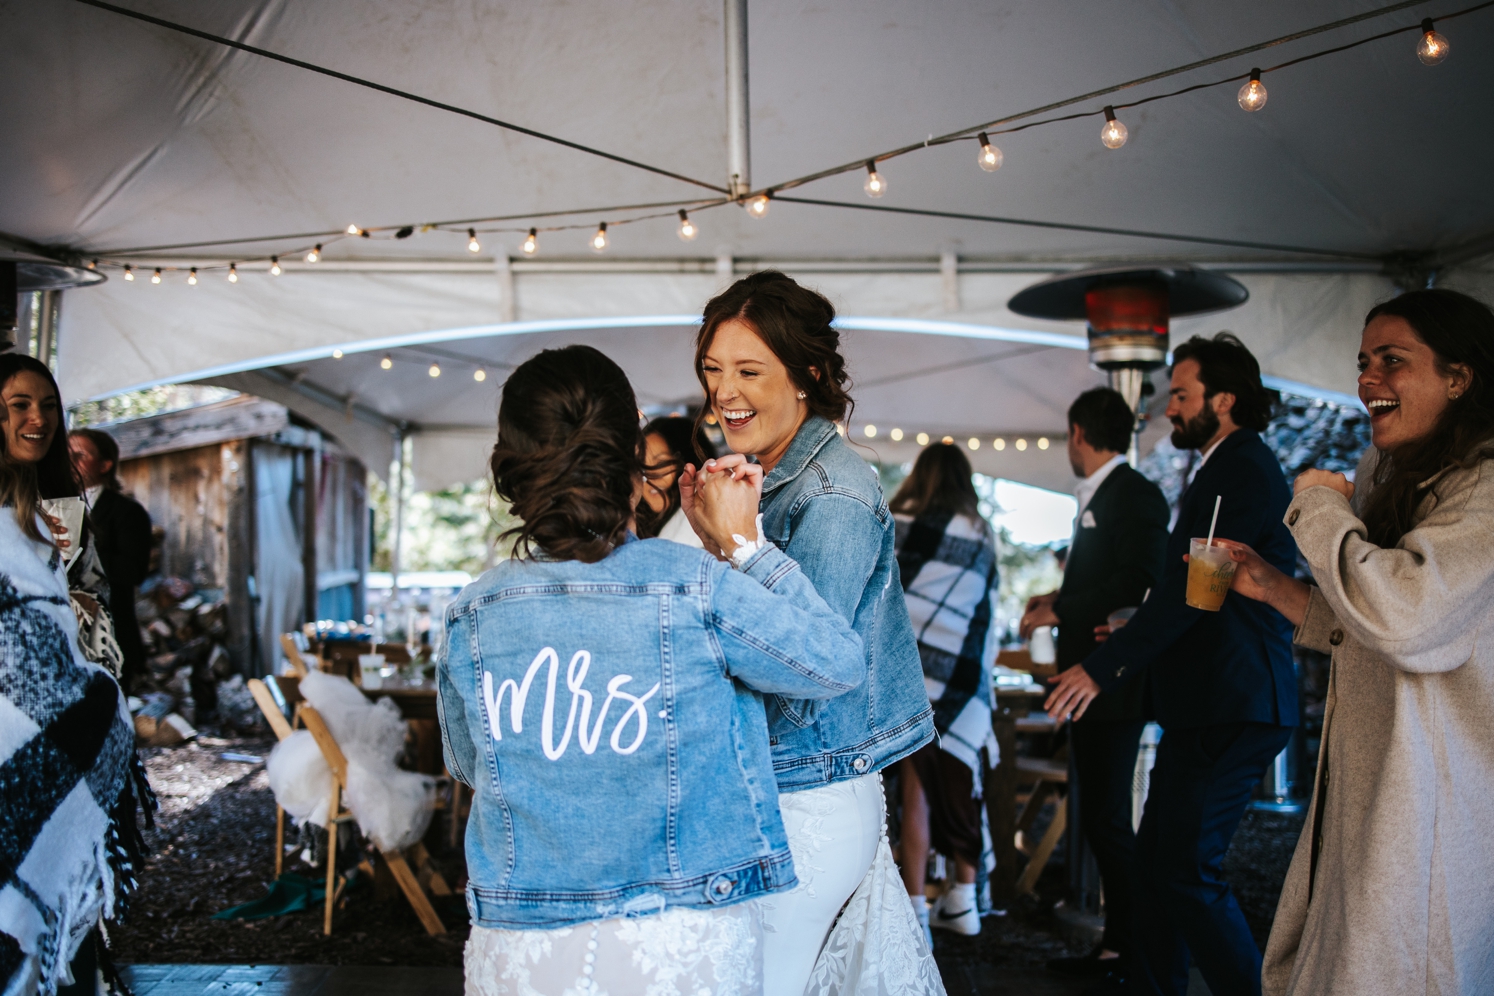 Brides wearing denim jackets and dancing at wedding reception | McArthur Weddings and Events